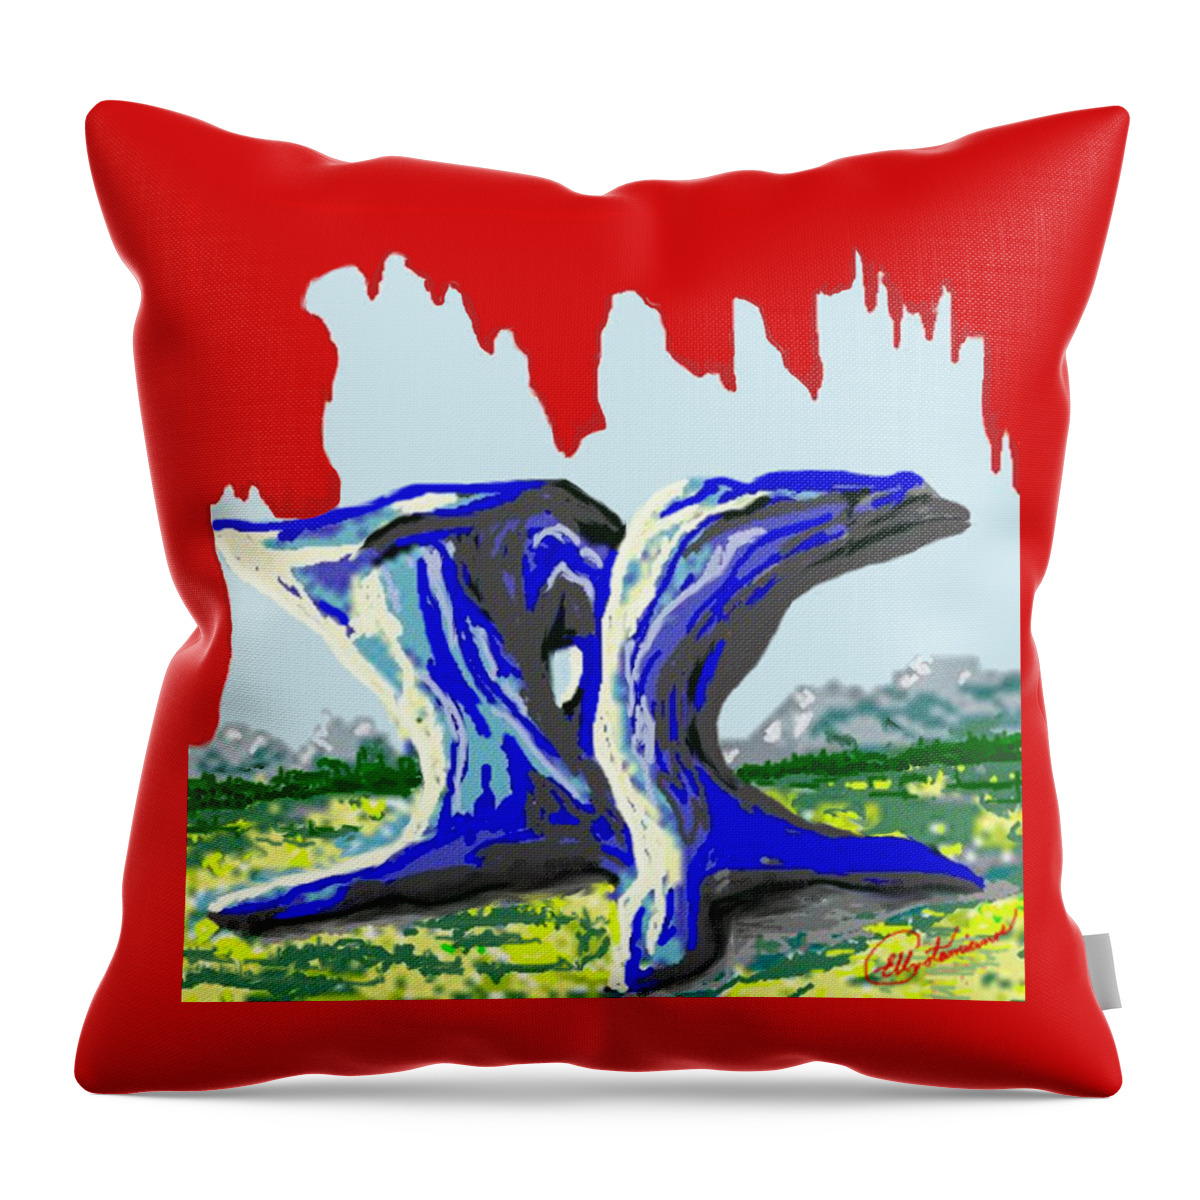 Rocks Throw Pillow featuring the painting Rock Formations by Elly Potamianos